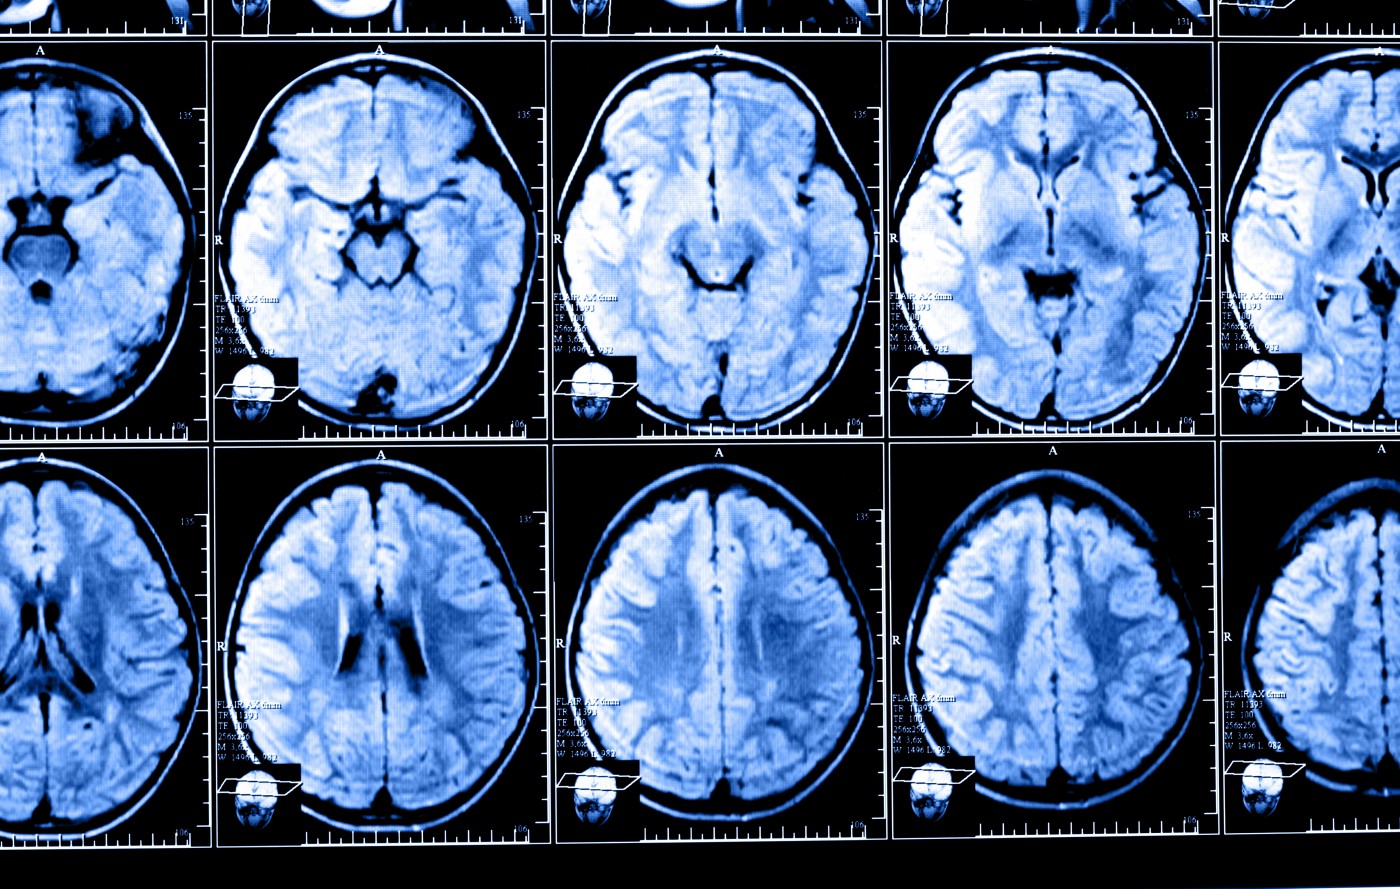 MRI-guided MS treatment changes